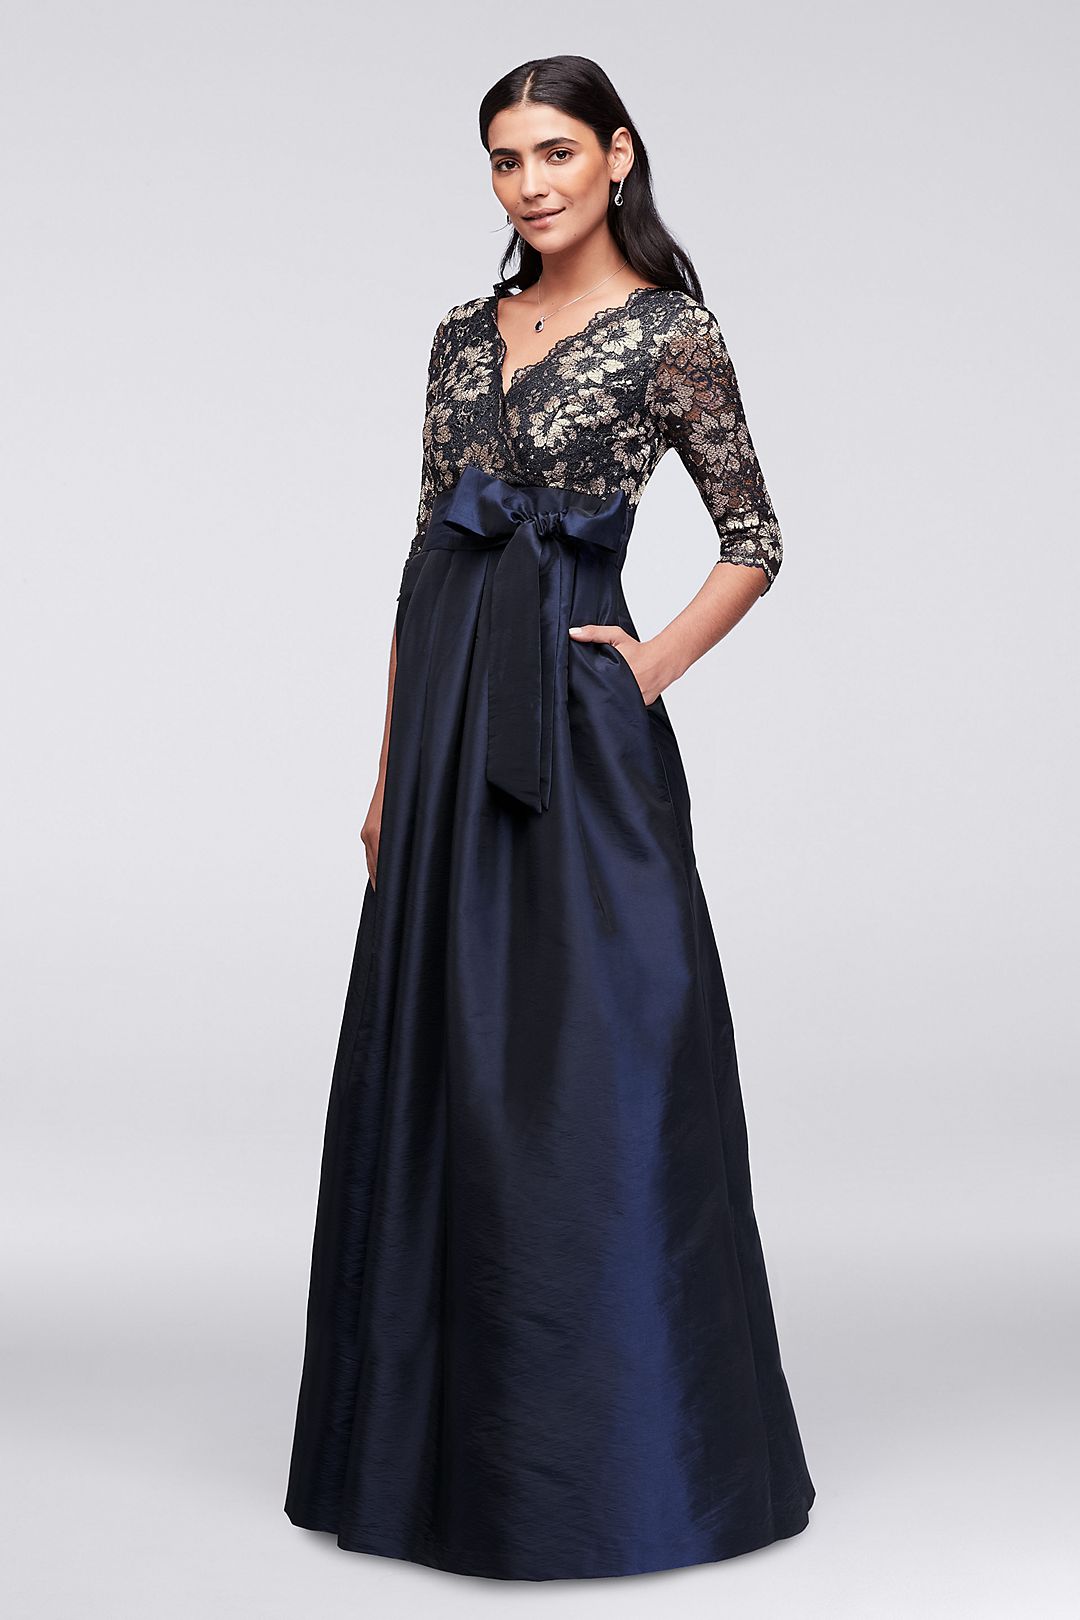 Shantung and Floral Lace Ball Gown  Image 4